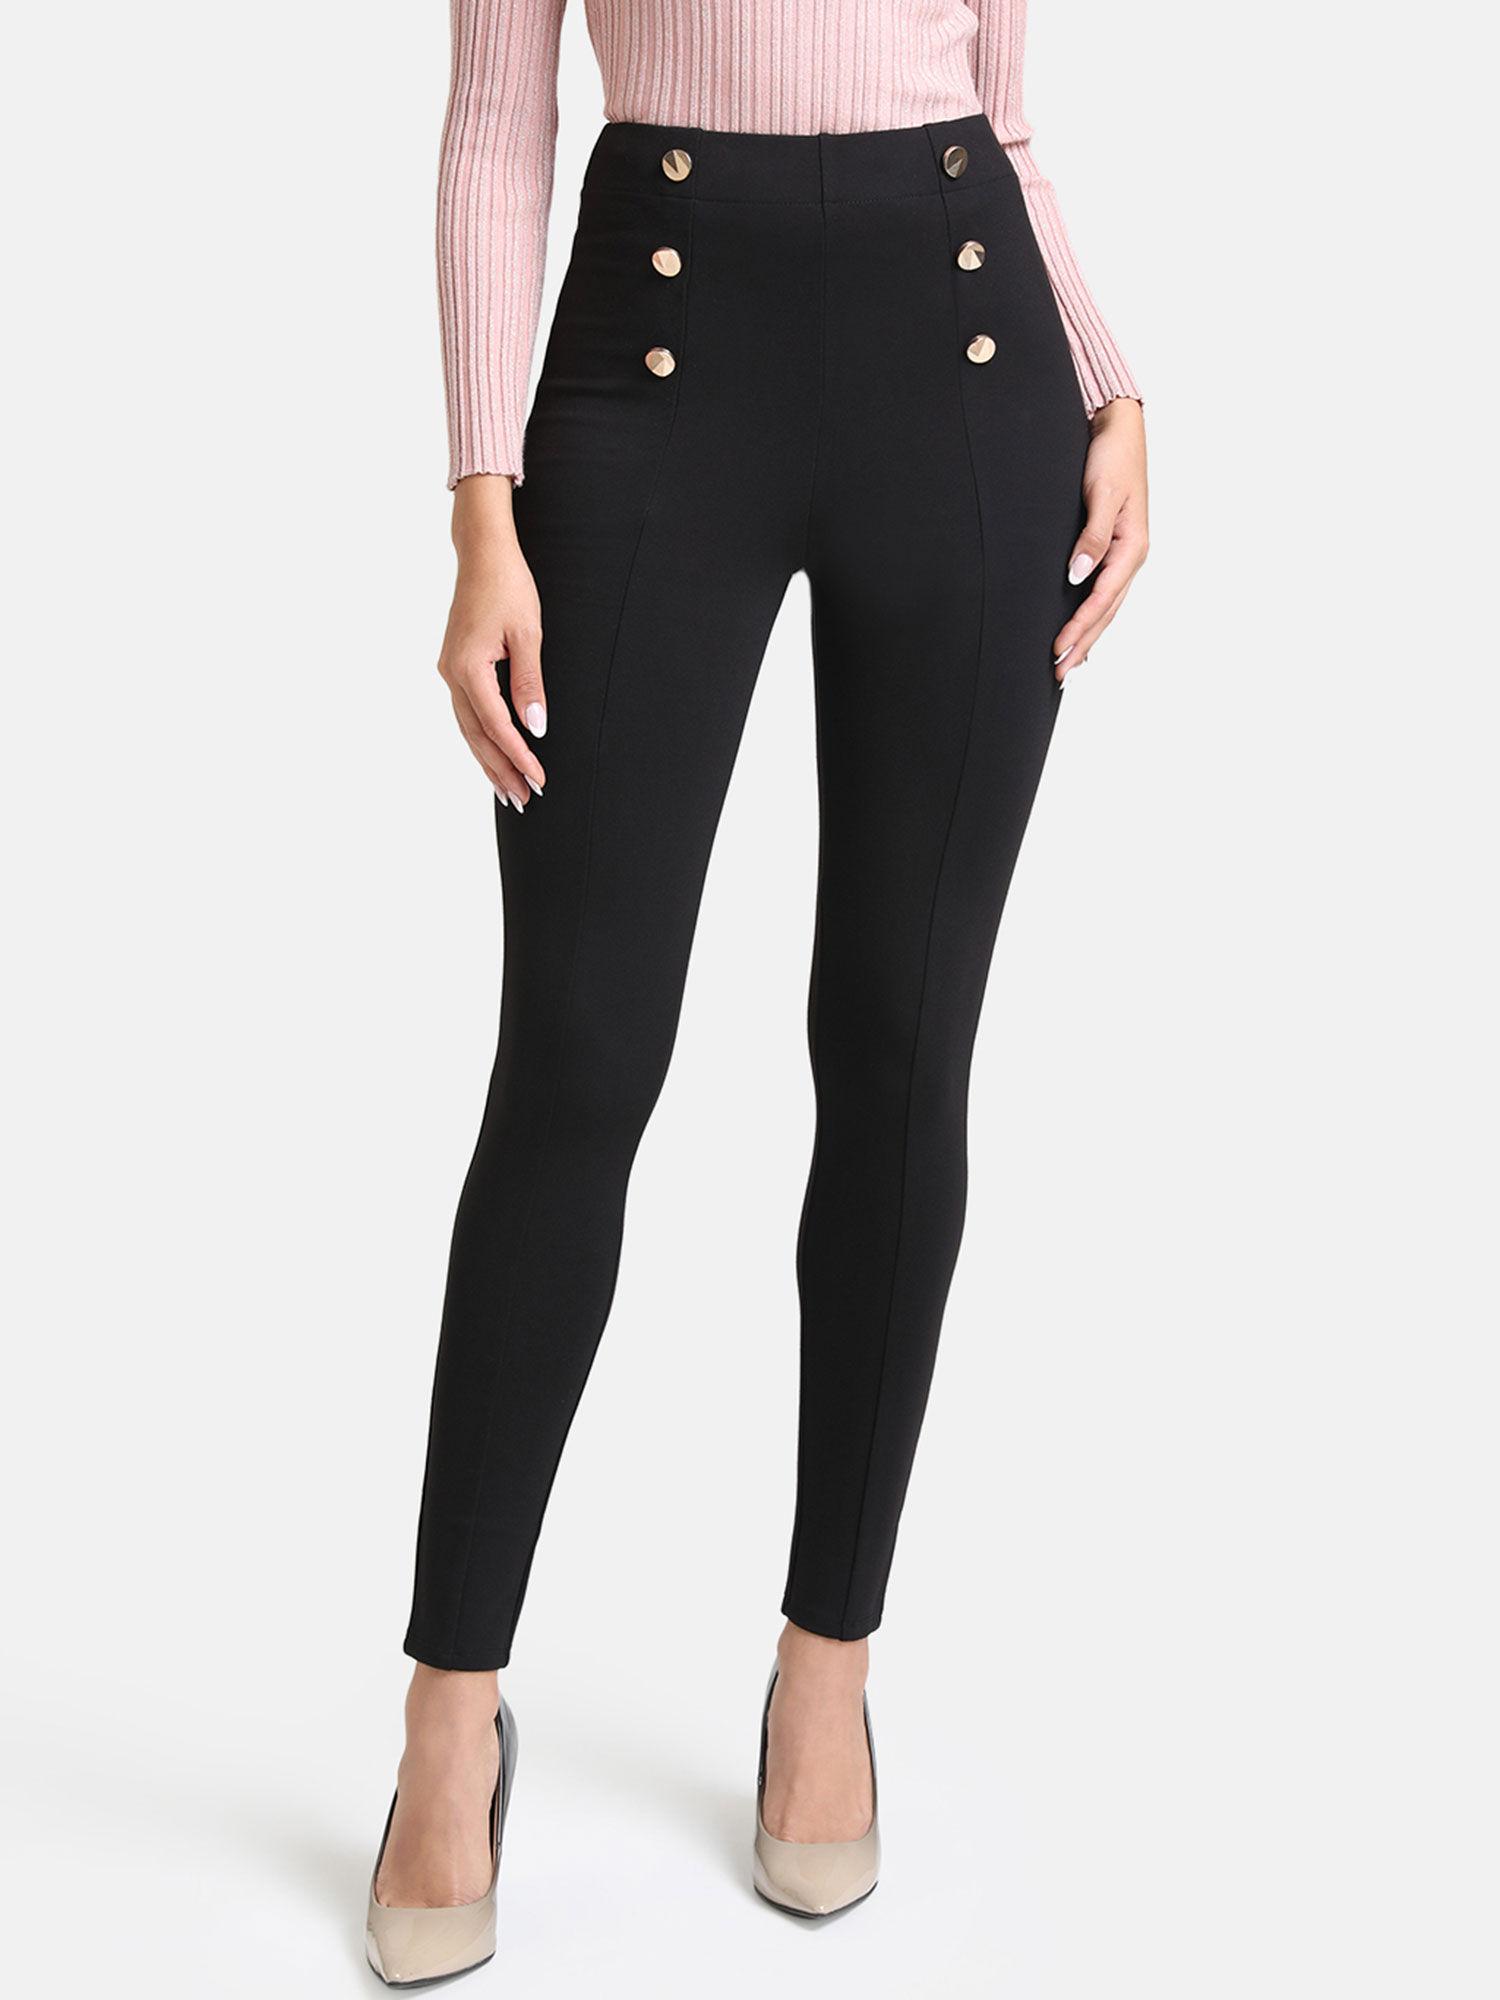 black-solid-jegging-with-metal-buttons